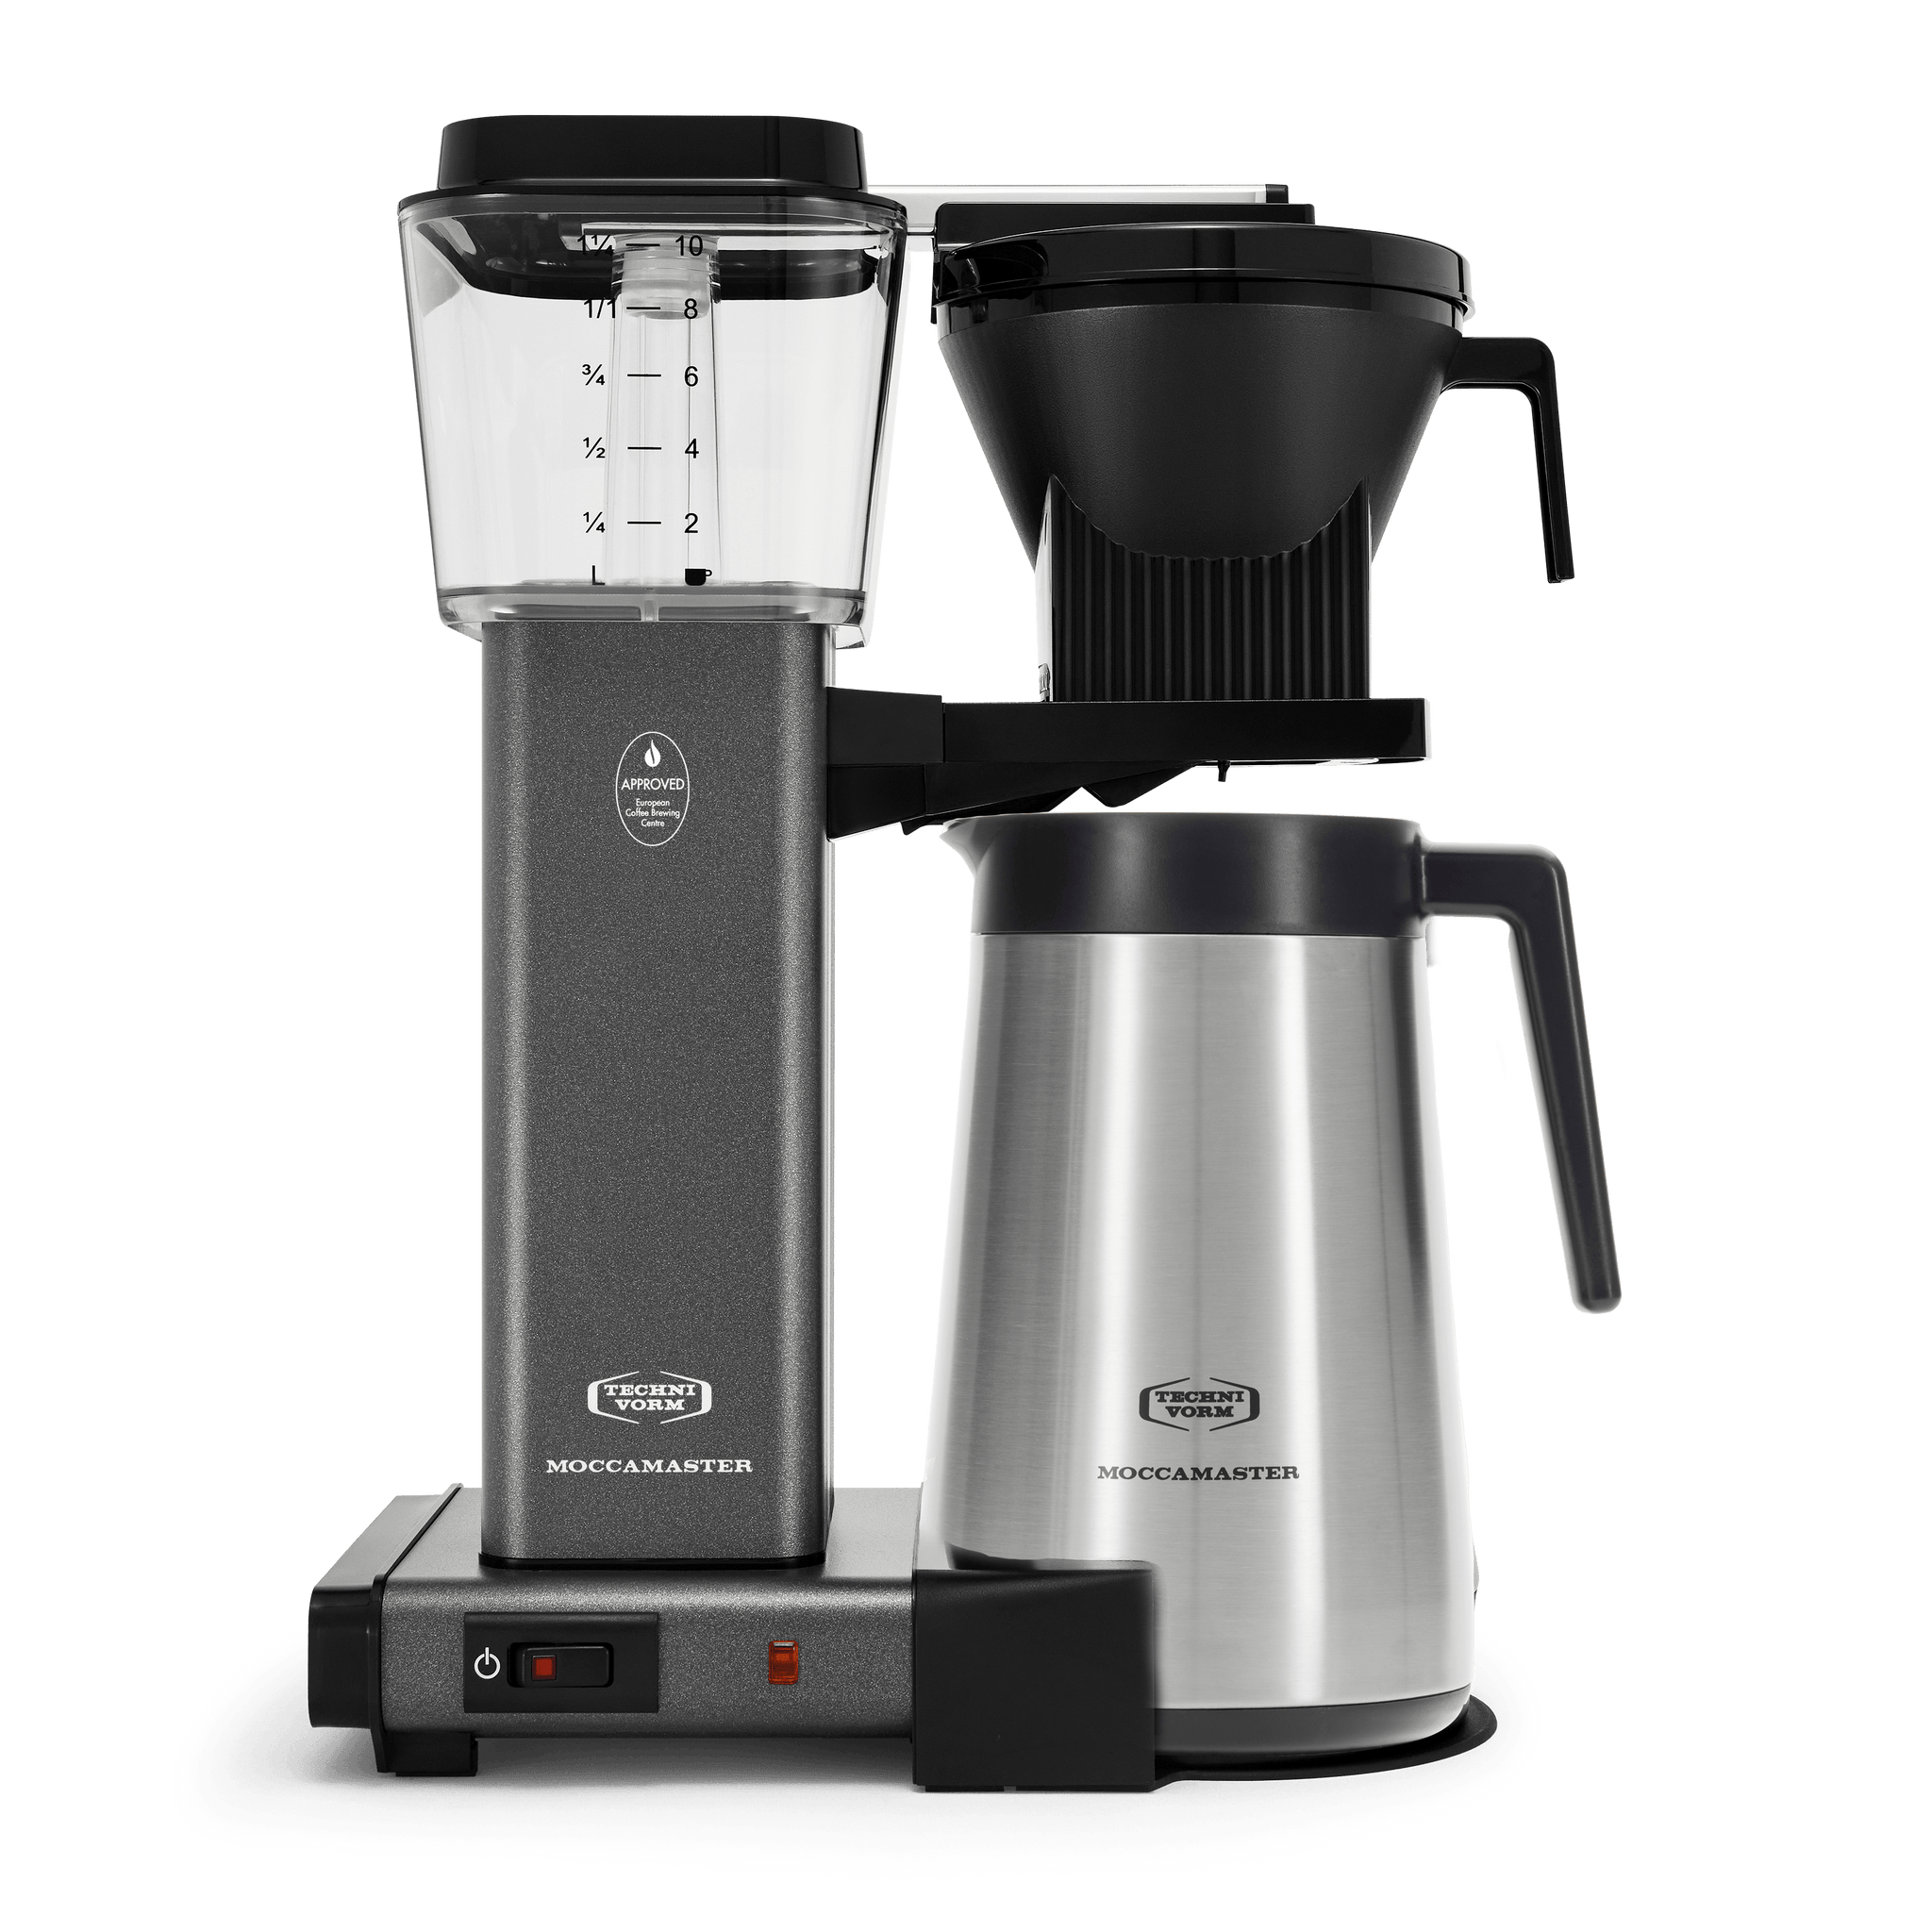 Pour Over Automatic Drip-Stop Coffee Maker: Brewer - KBGT Moccamaster USA Moccamaster